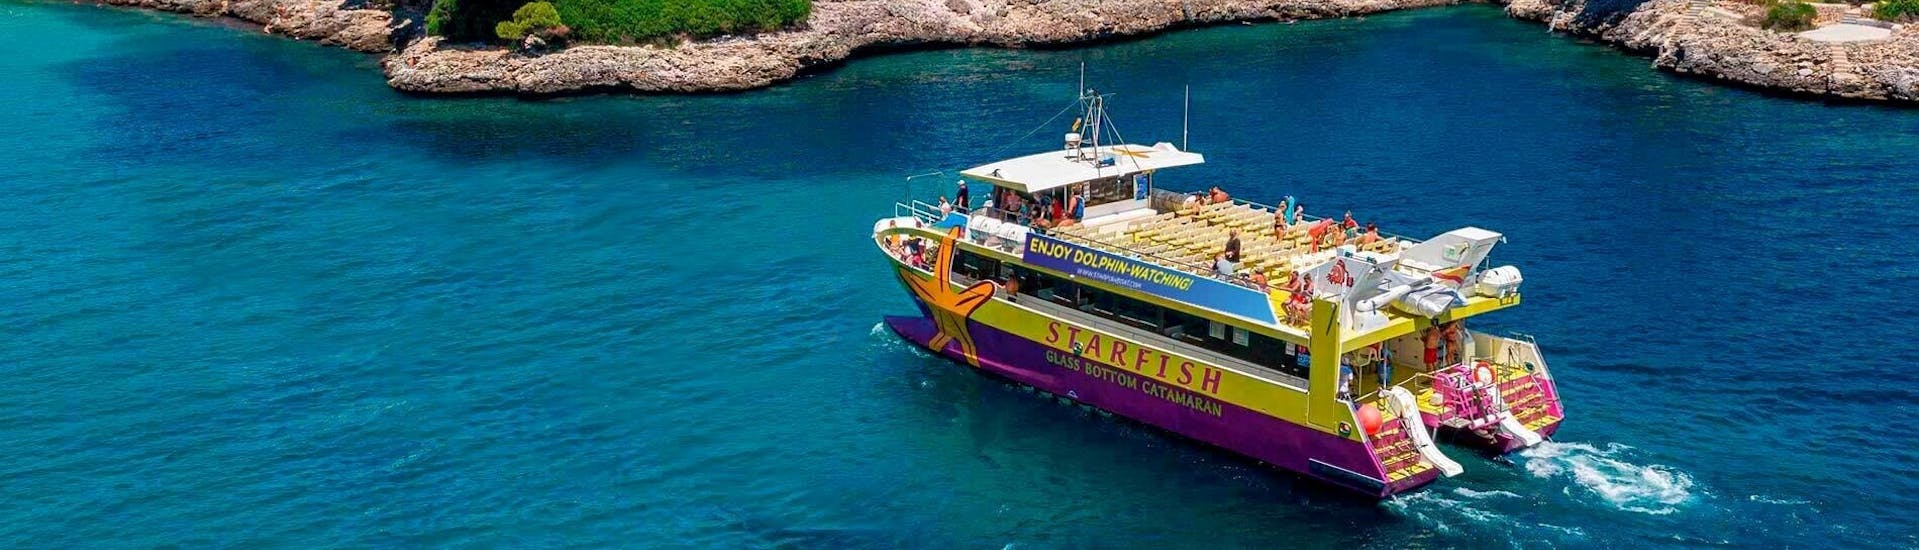 Our boat during a Glassbottom Catamaran Trip to Cala Figuera with Snorkeling with Starfish Glass Bottom Boats Mallorca.